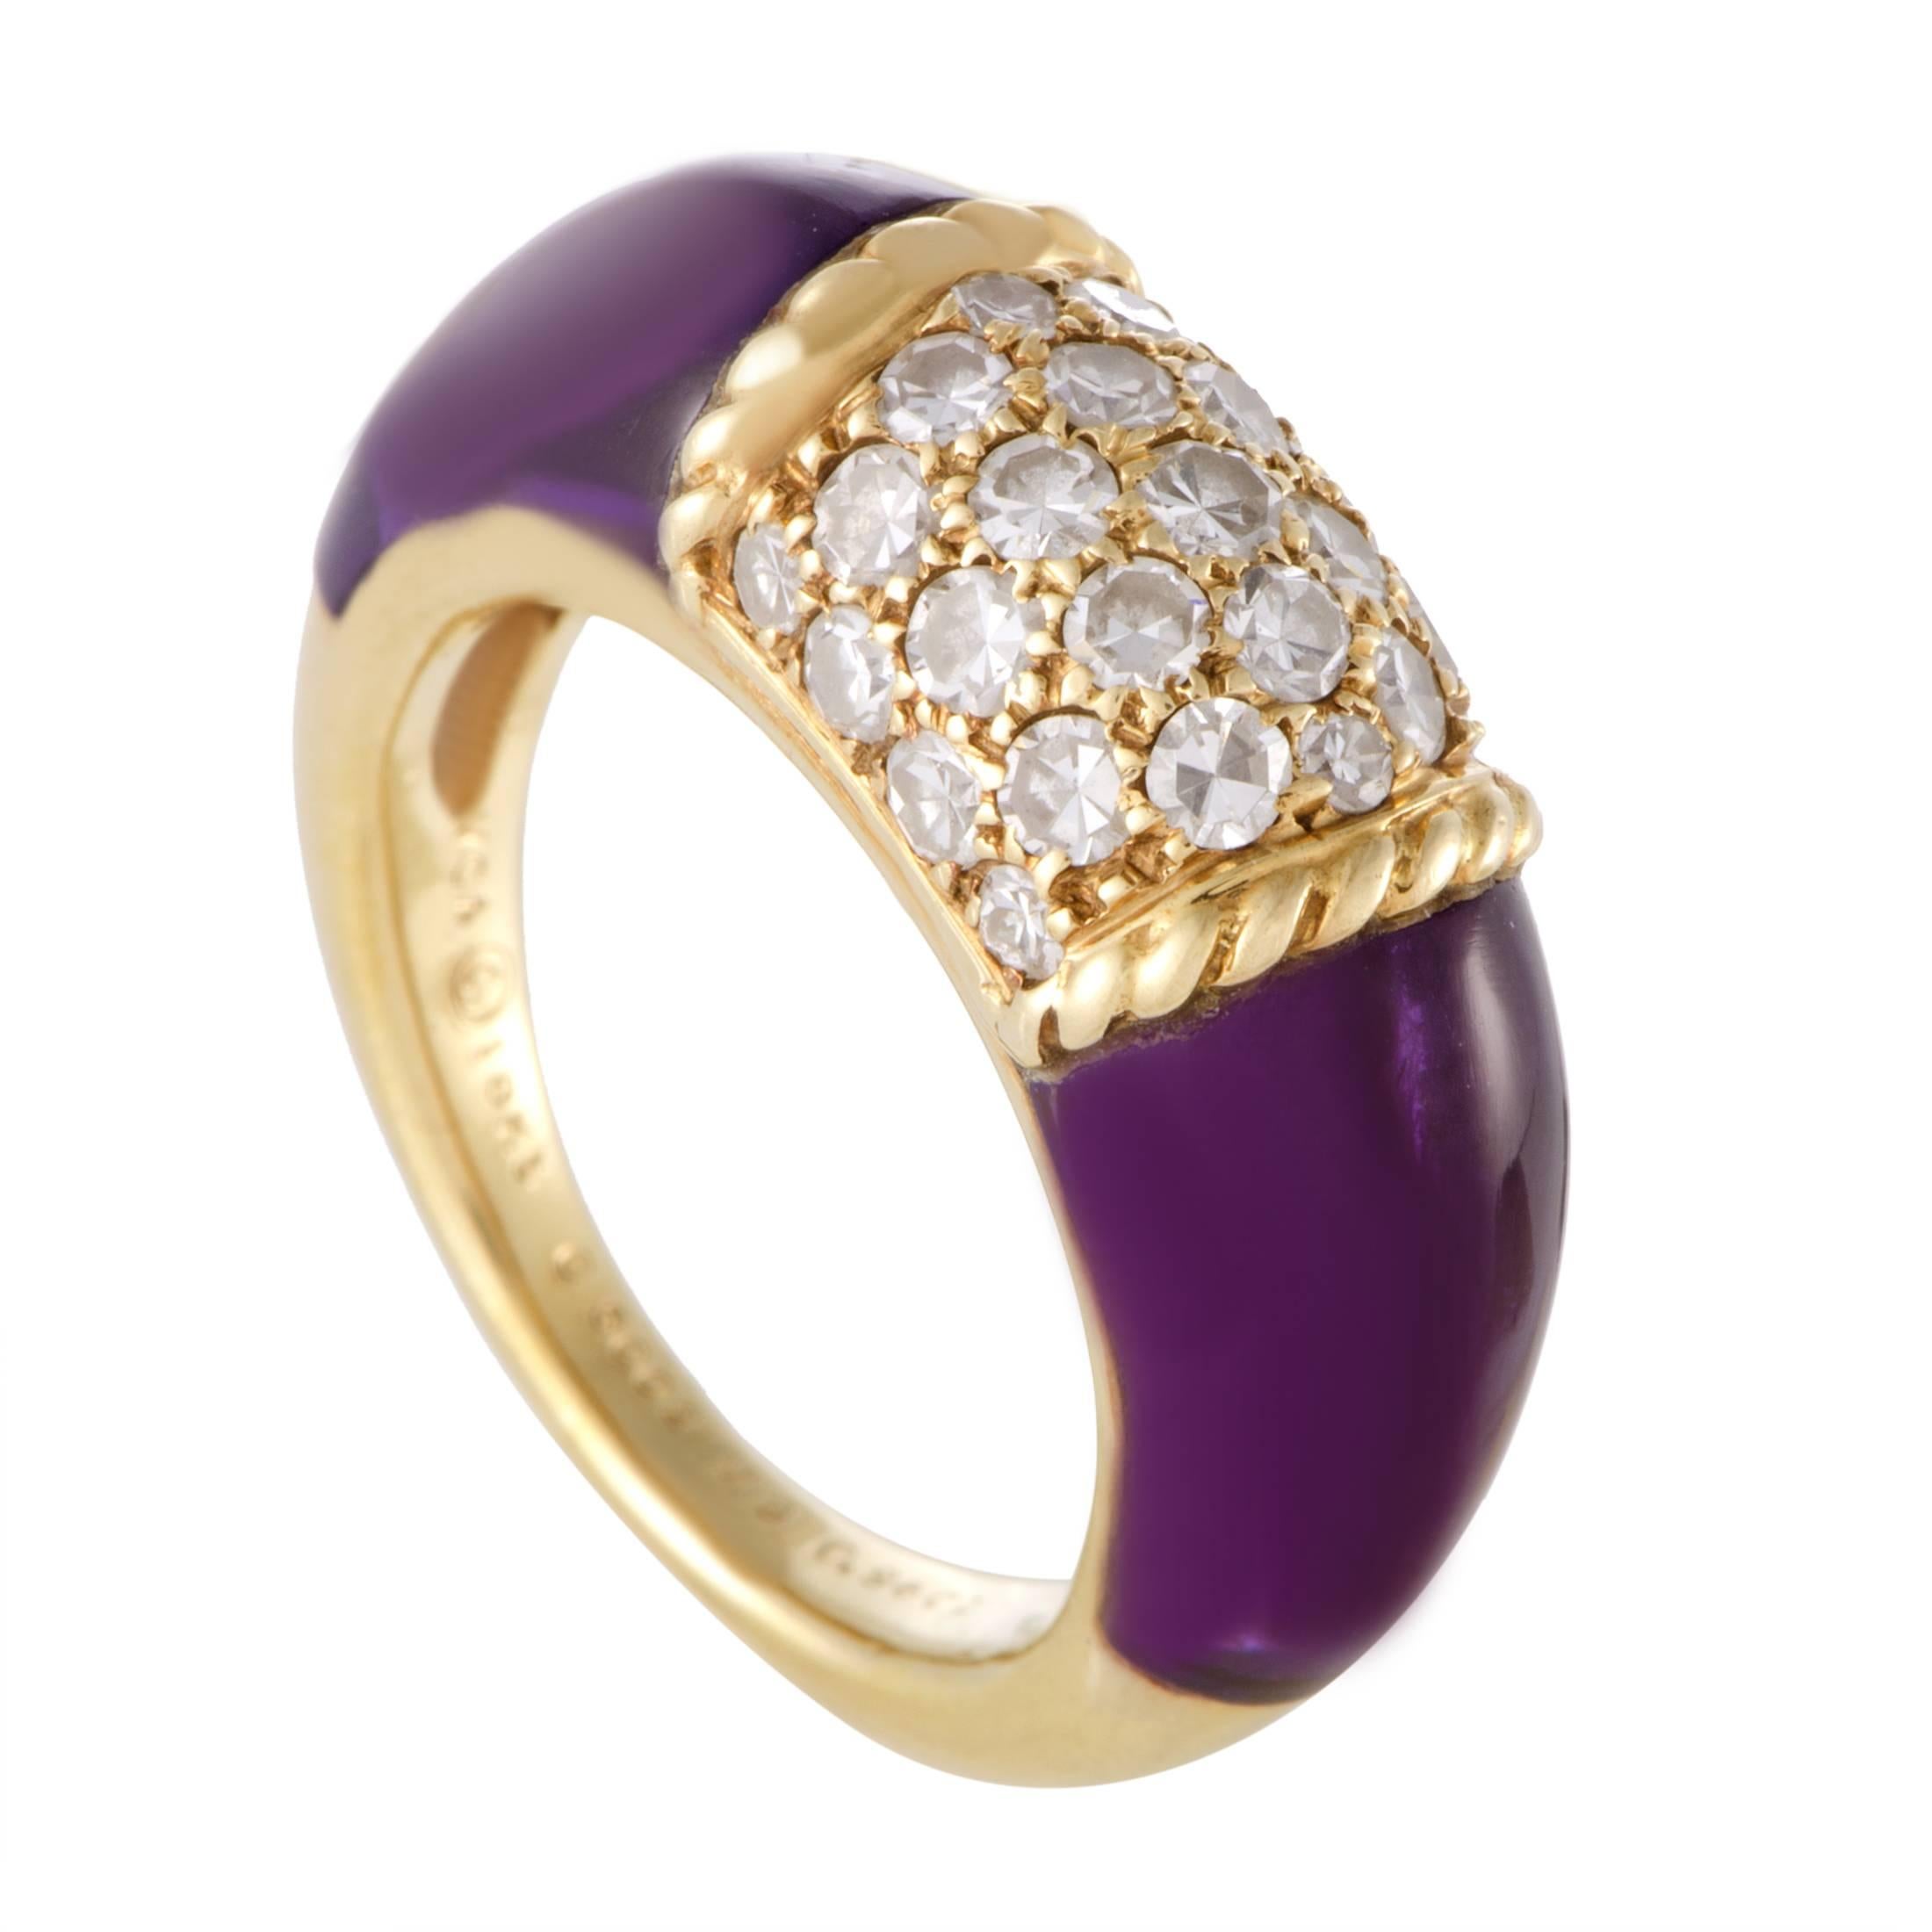 Van Cleef & Arpels Diamond Pave Amethyst Yellow Gold Band Ring